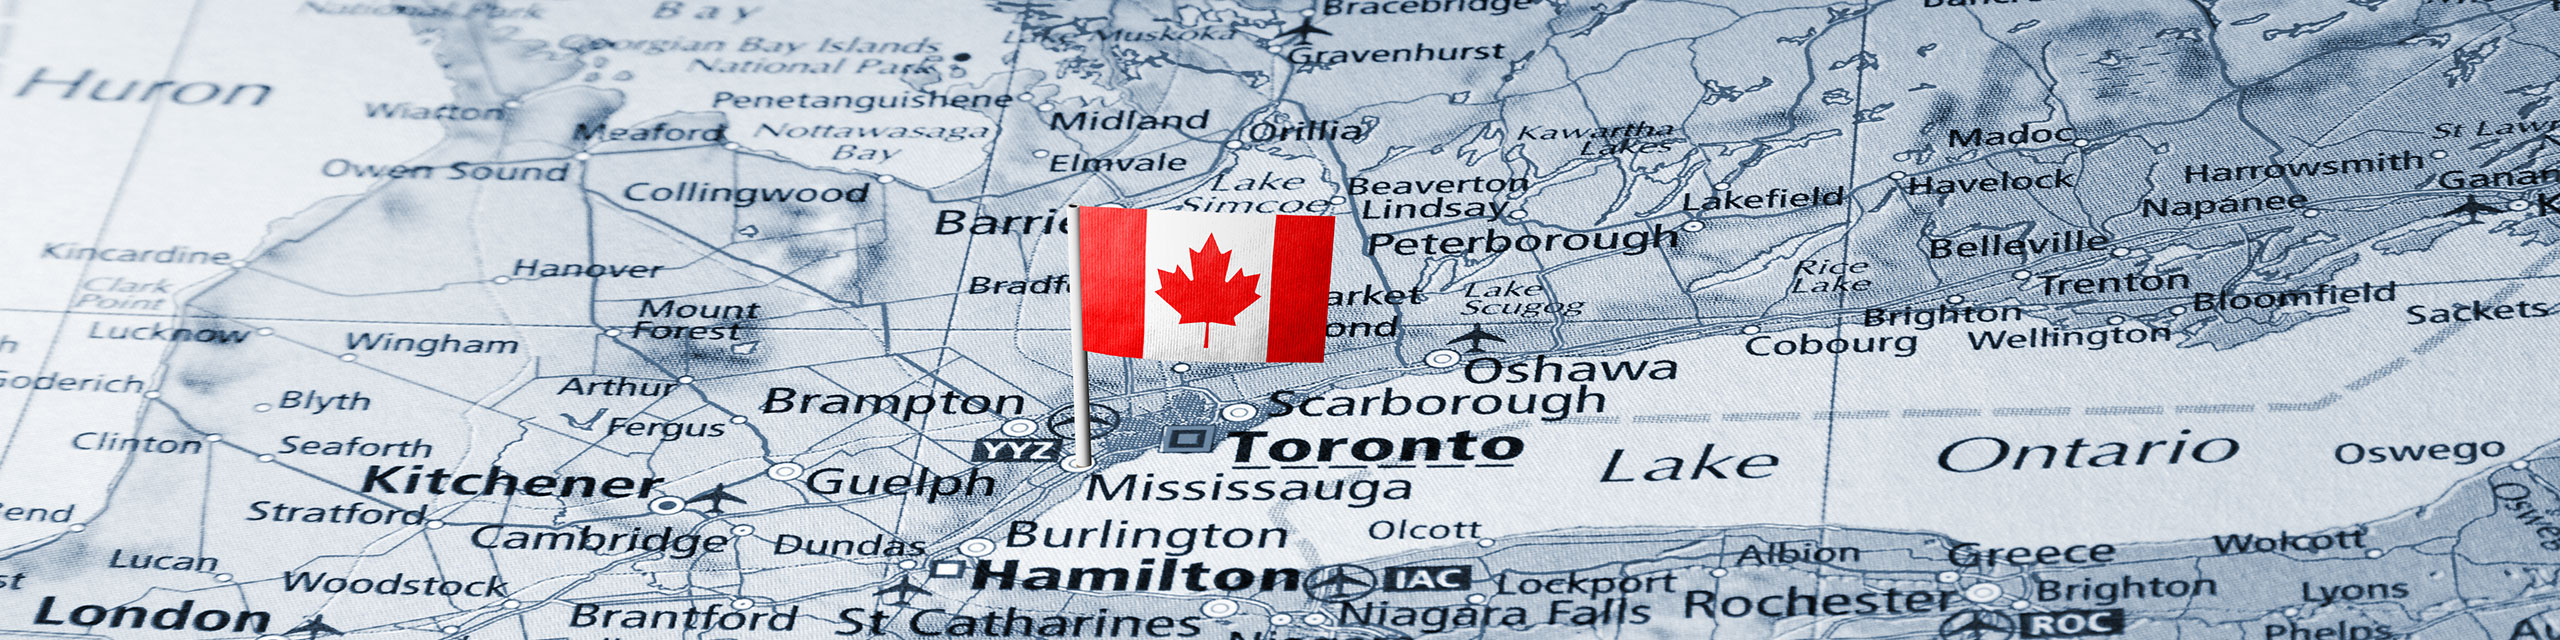 Greater Toronto Area map of cities with Canada flag pinned on Mississauga 